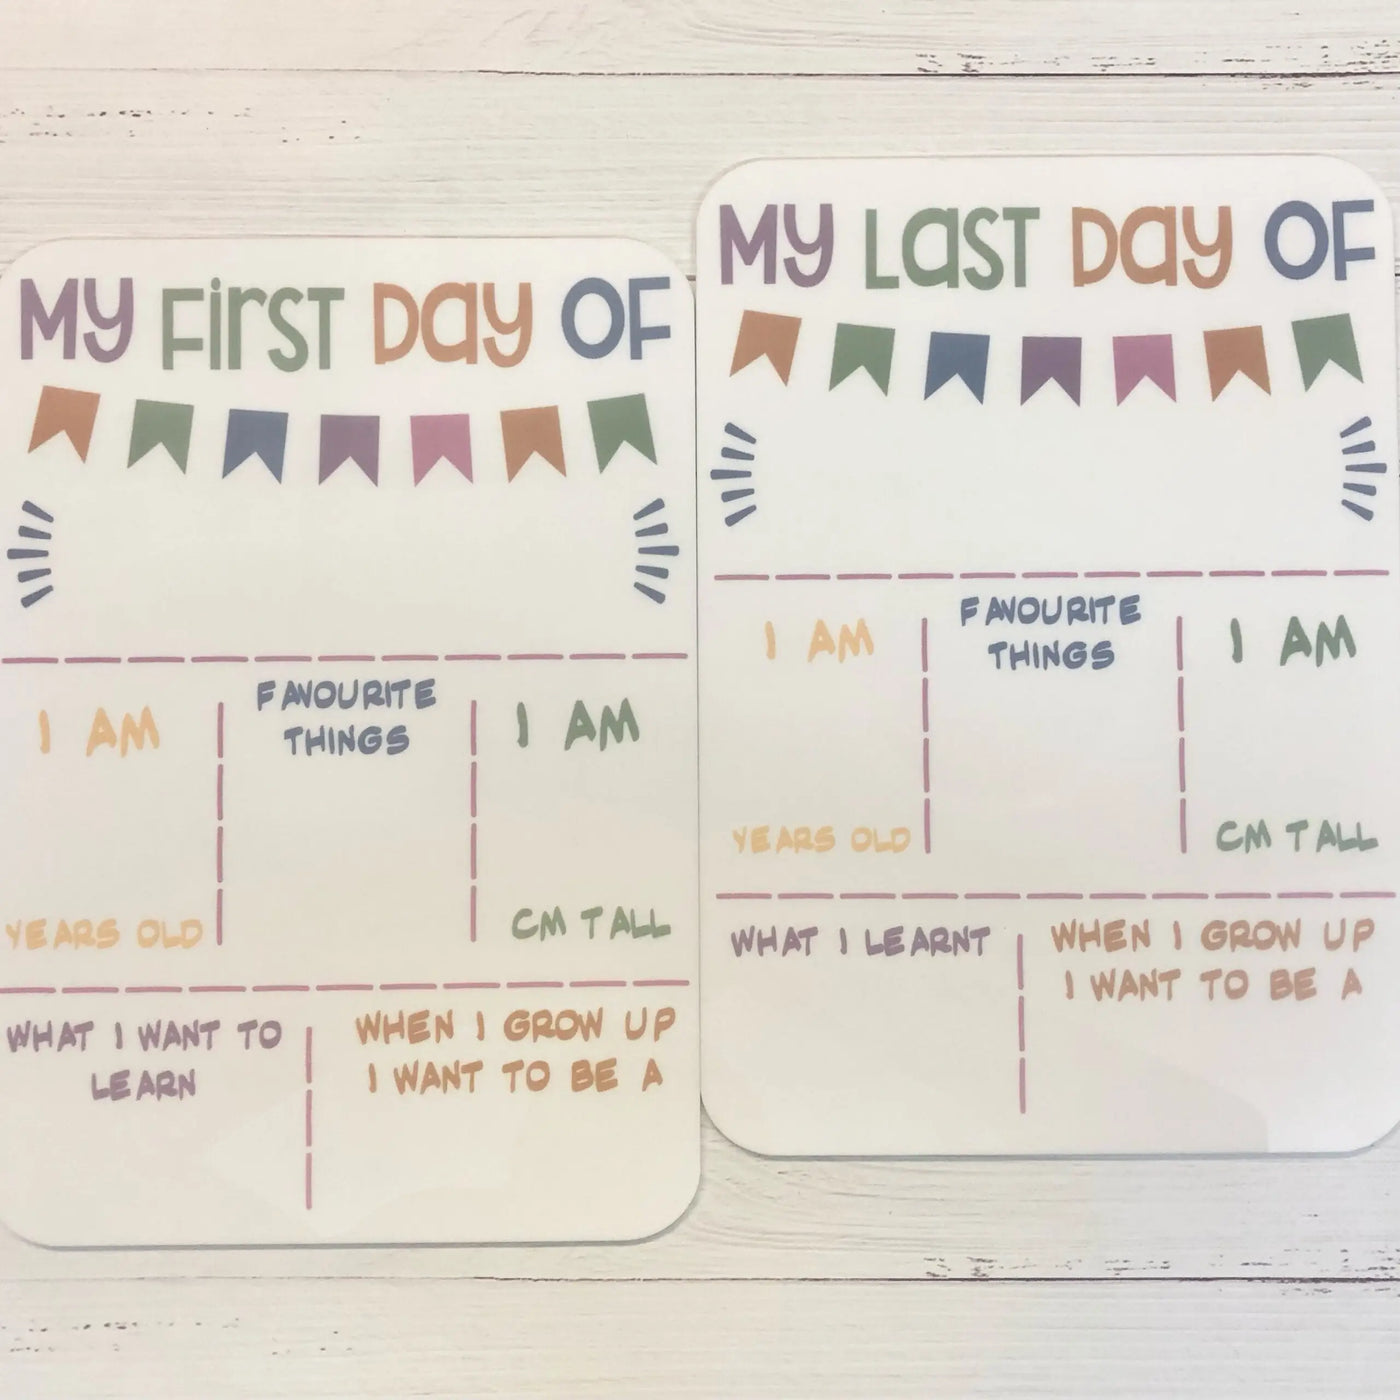 Kids First Day and Last Day Memory Board